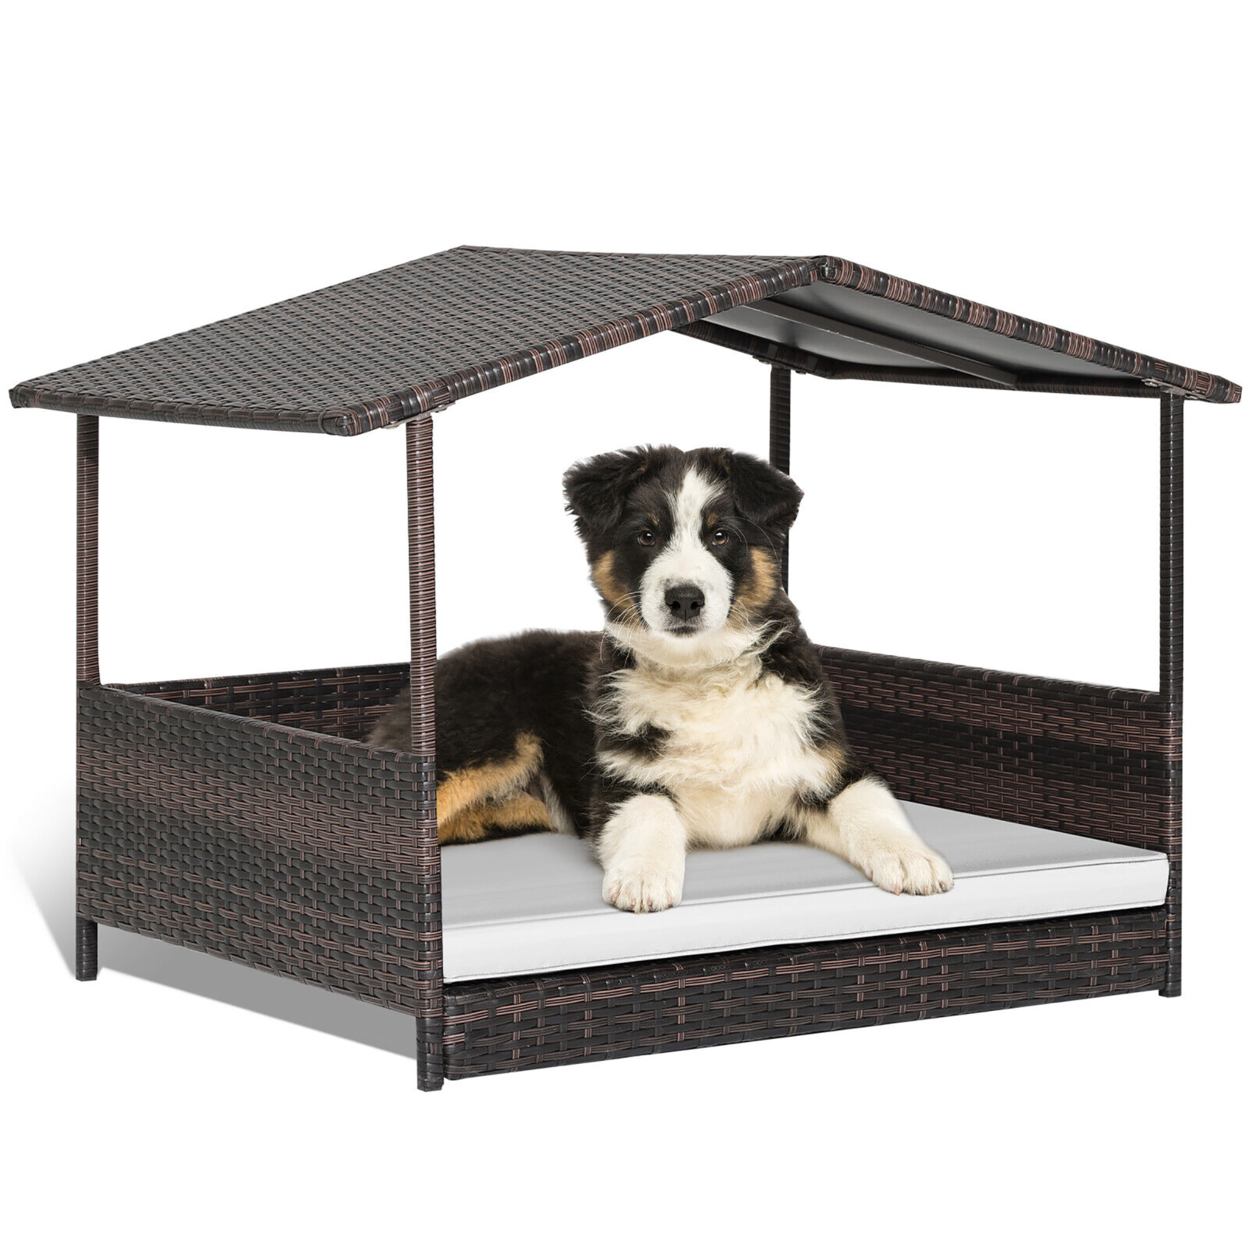 Wicker Dog House W/ Cushion Lounge Raised Rattan Bed For Indoor/Outdoor